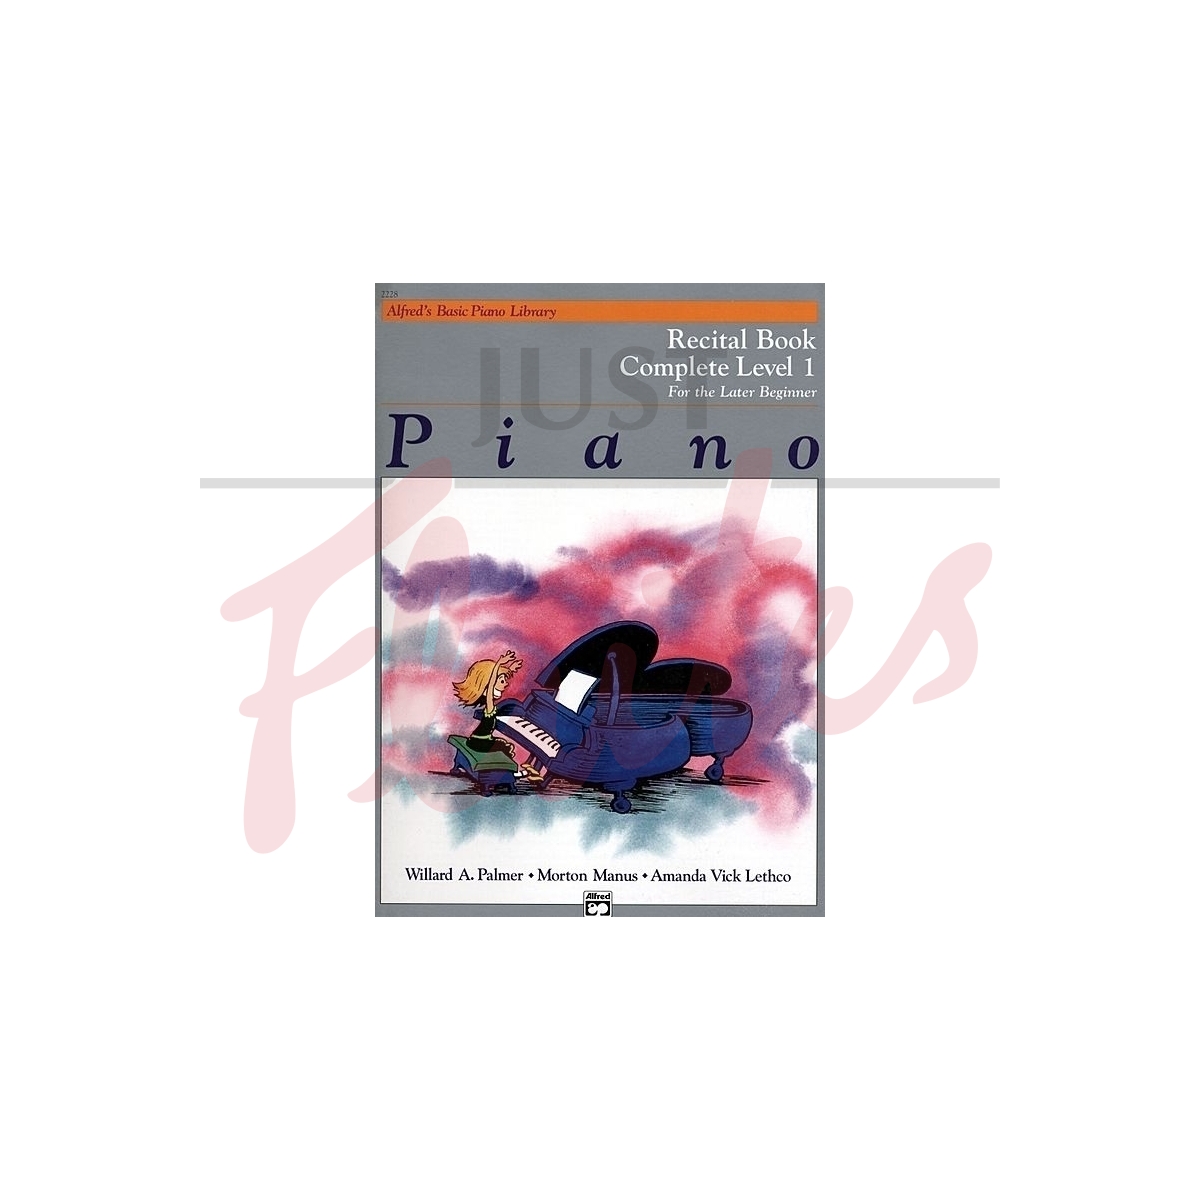 Alfred's Basic Piano Library: Recital Book Complete Level 1